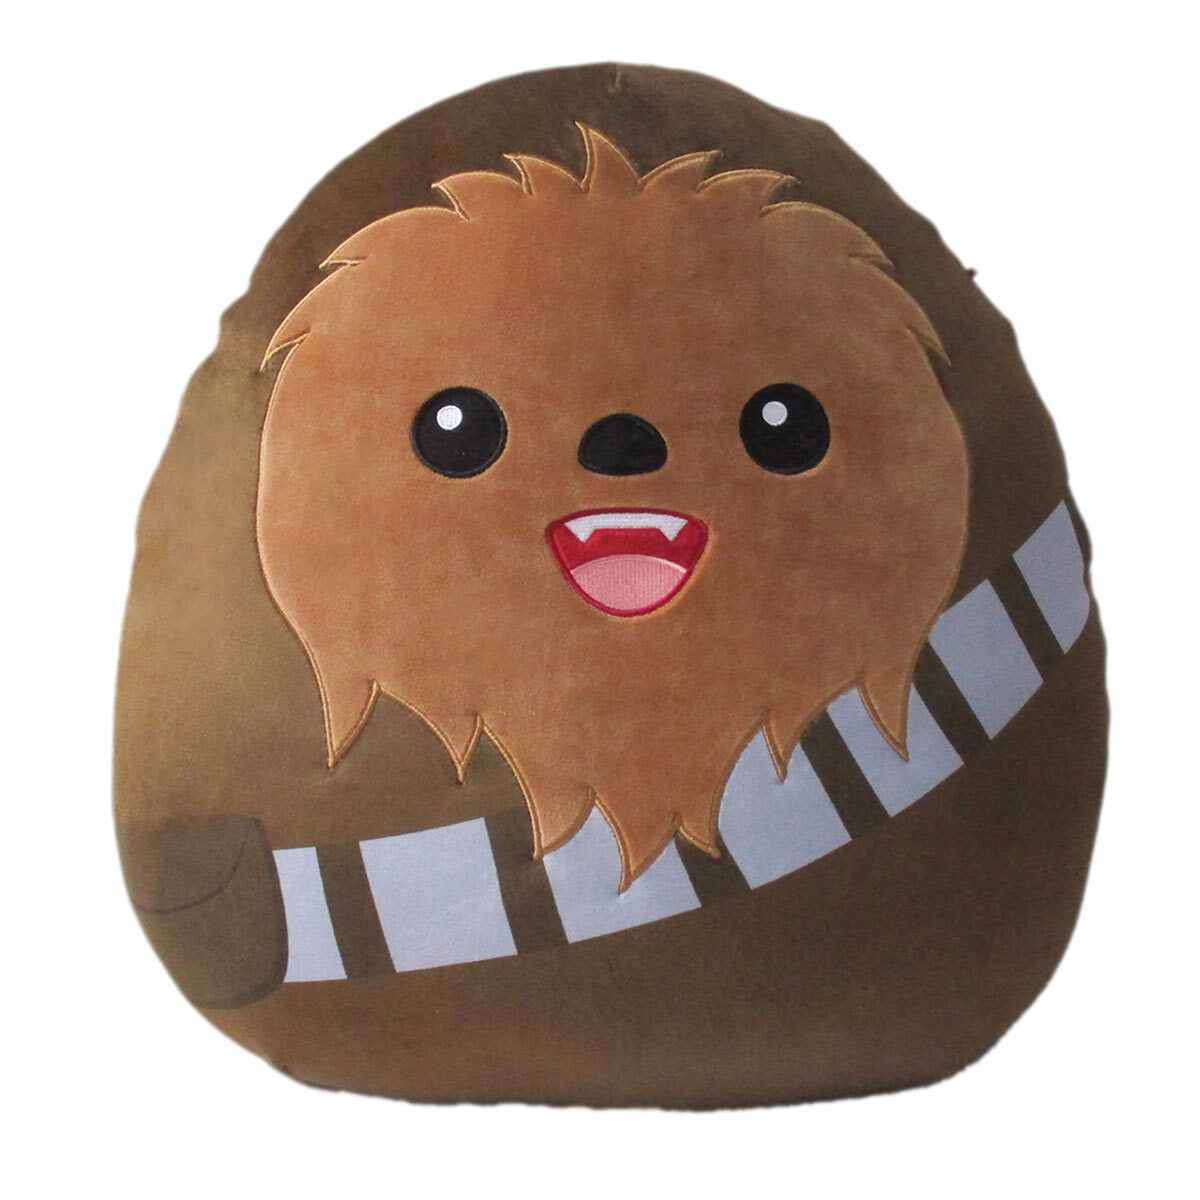 Buy Squishmallow Star Wars 20" Chewbacca Image at Costco.co.uk